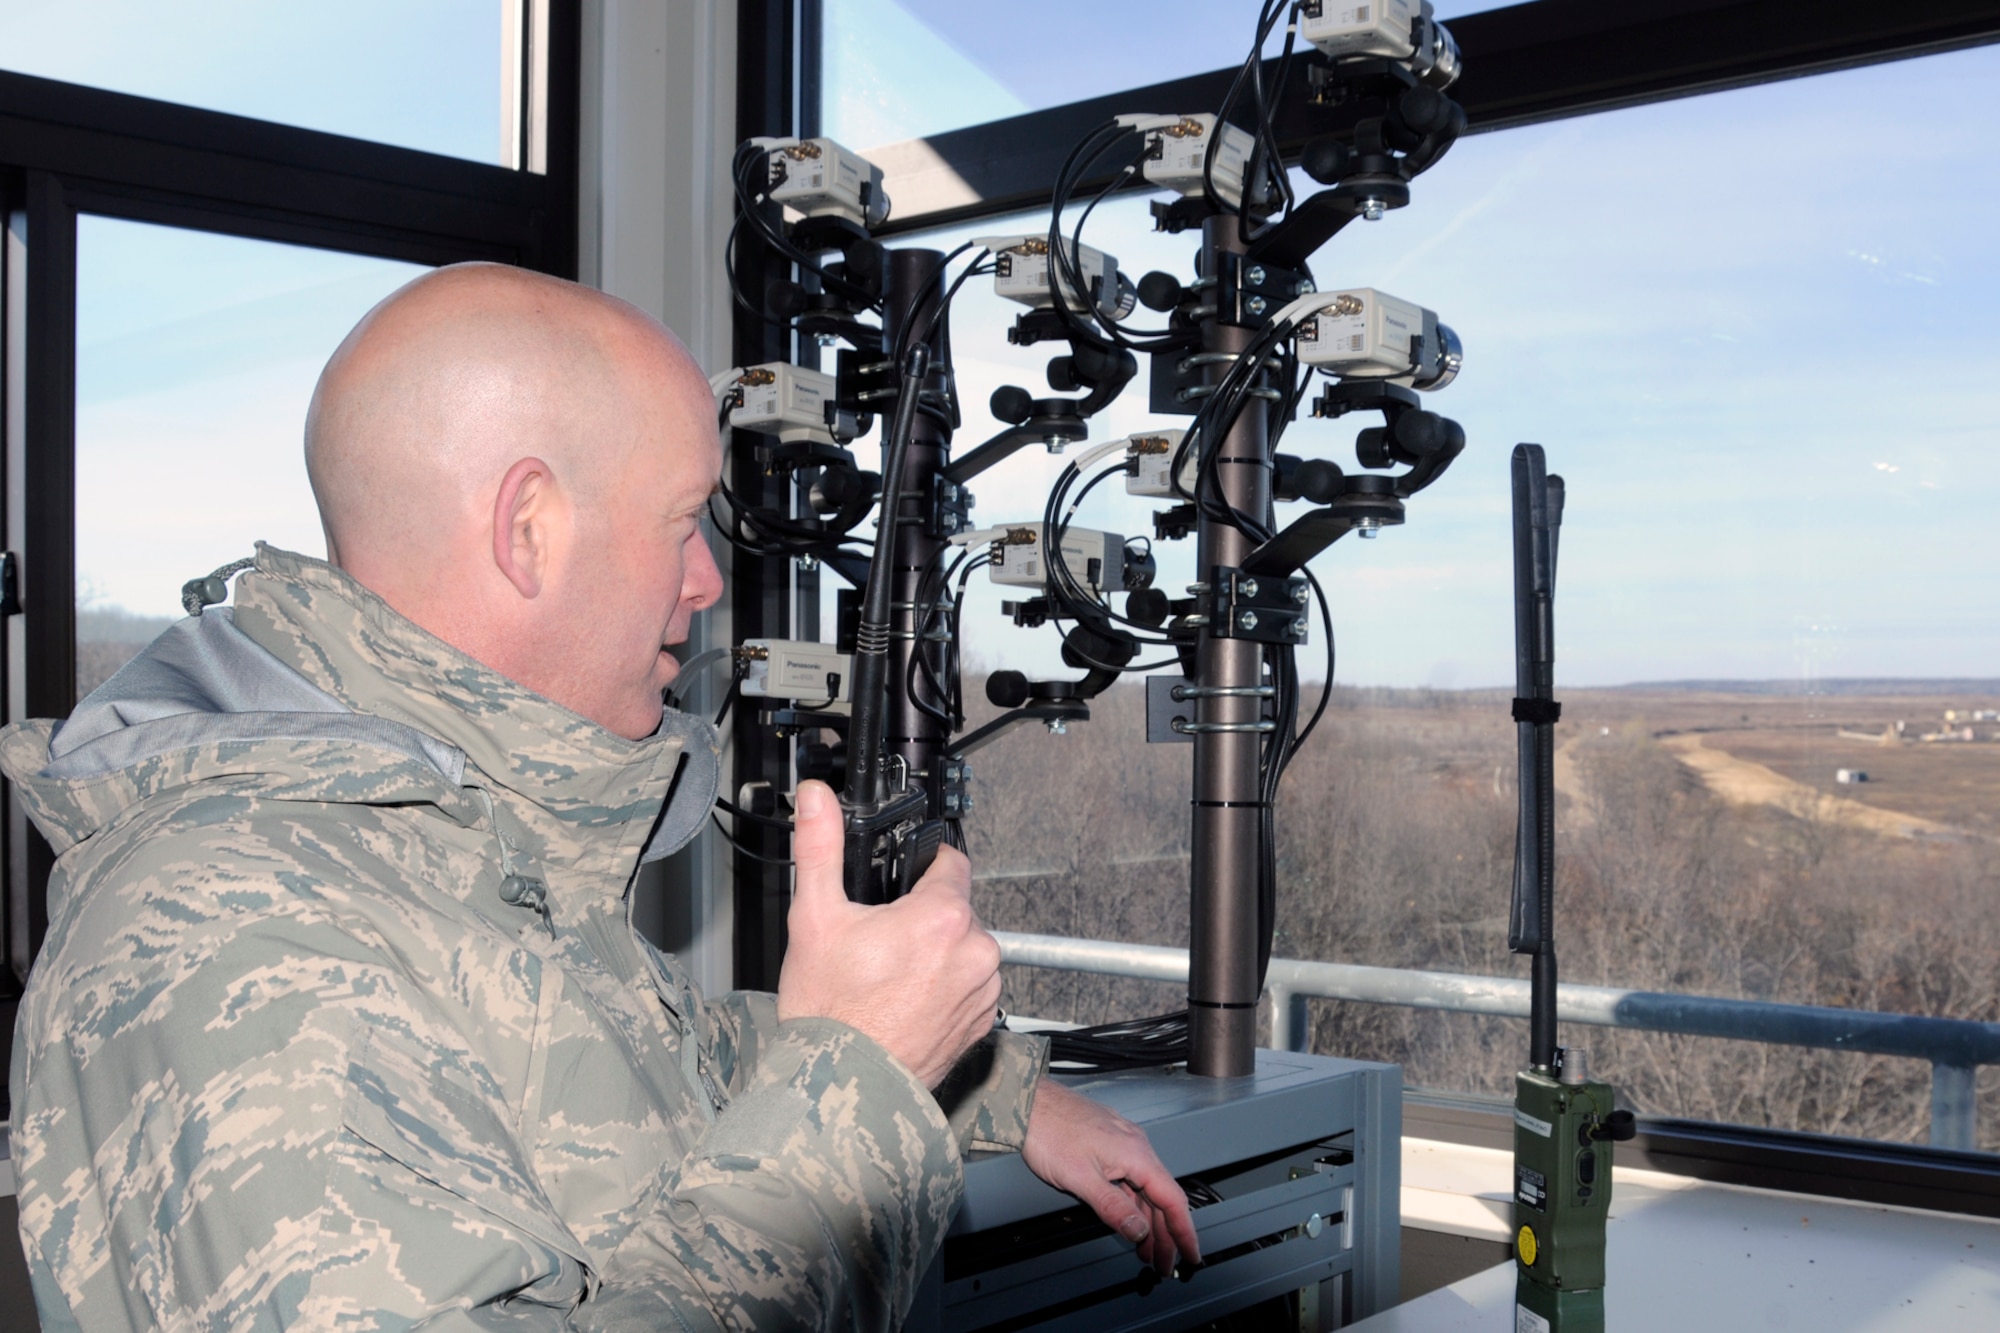 Senior Master Sgt. Alan VanPate communicates with an aircraft while in a control tower at the Grayling Aerial Gunnery Range, near Grayling, Mich., April 24, 2012. VanPate is a joint terminal attack controller and helps to provide training to visiting JTAC personnel to the Grayling range. JTACs are Air Force enlisted members who embed with infantry or other U.S. Army or Marine Corps ground forces to provide coordination of air power support with the Soldiers or Marines on the ground. (U.S. Air Force photo by TSgt. David Kujawa)